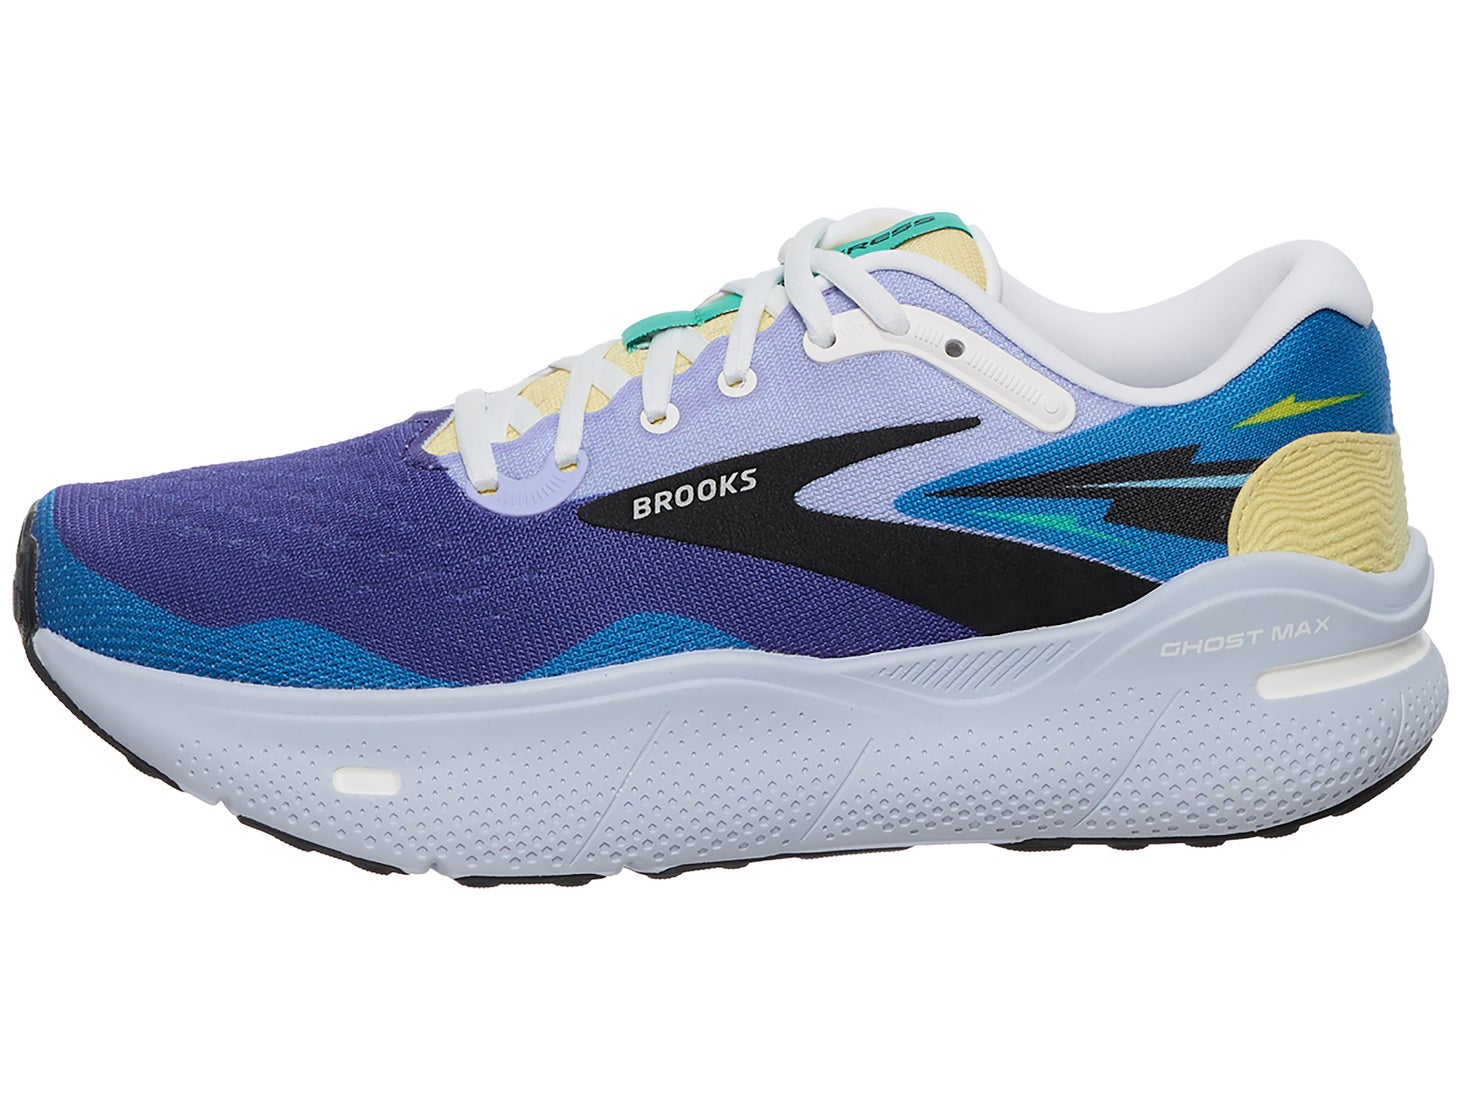 Brooks Ghost Max Women's Shoes Damon Blue/Yellow/Black | Tennis Only